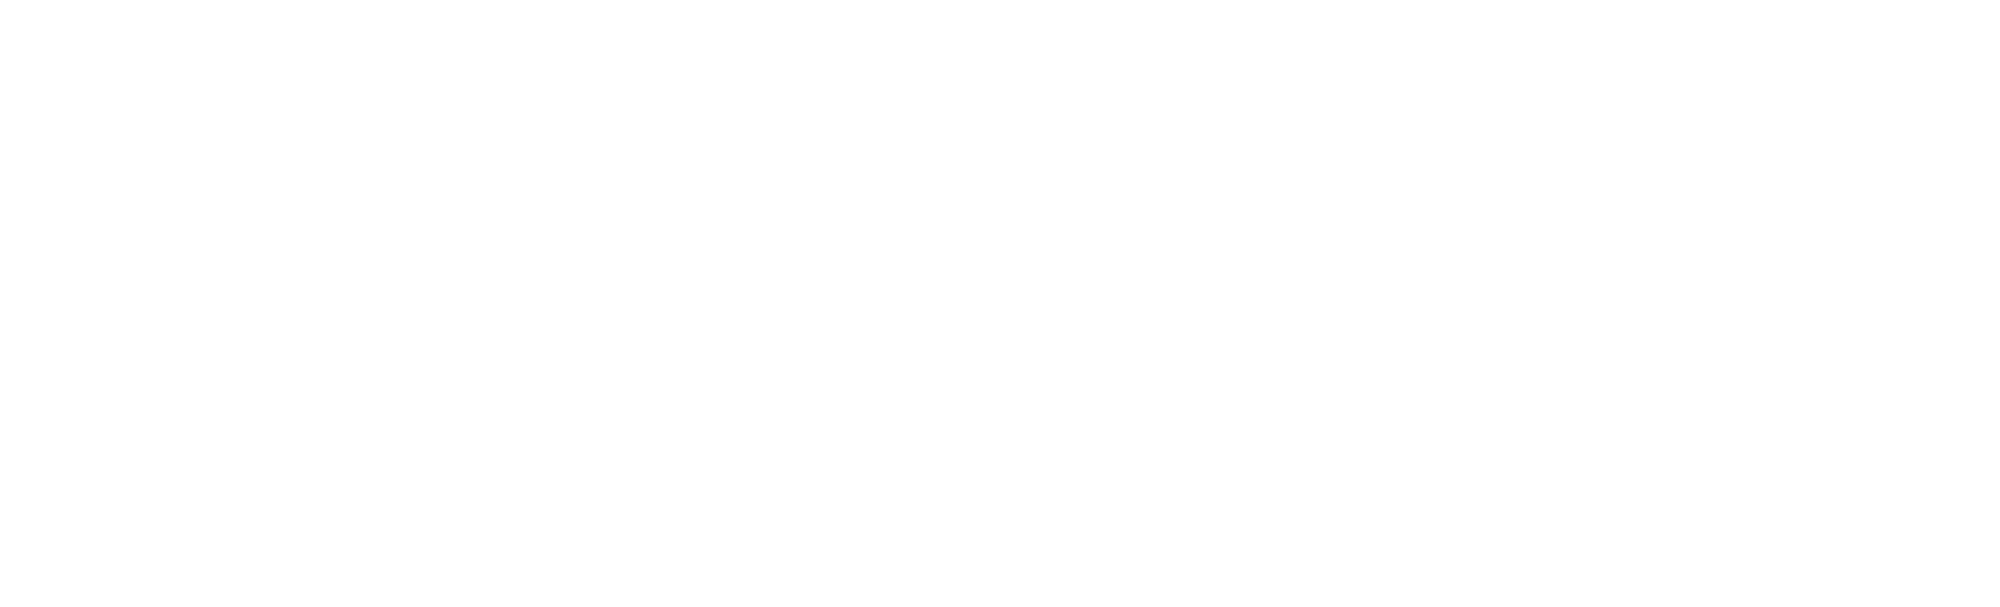 https://thewell.org.au/wp-content/uploads/2020/05/DOP-MET_Pastoral-Formation.png